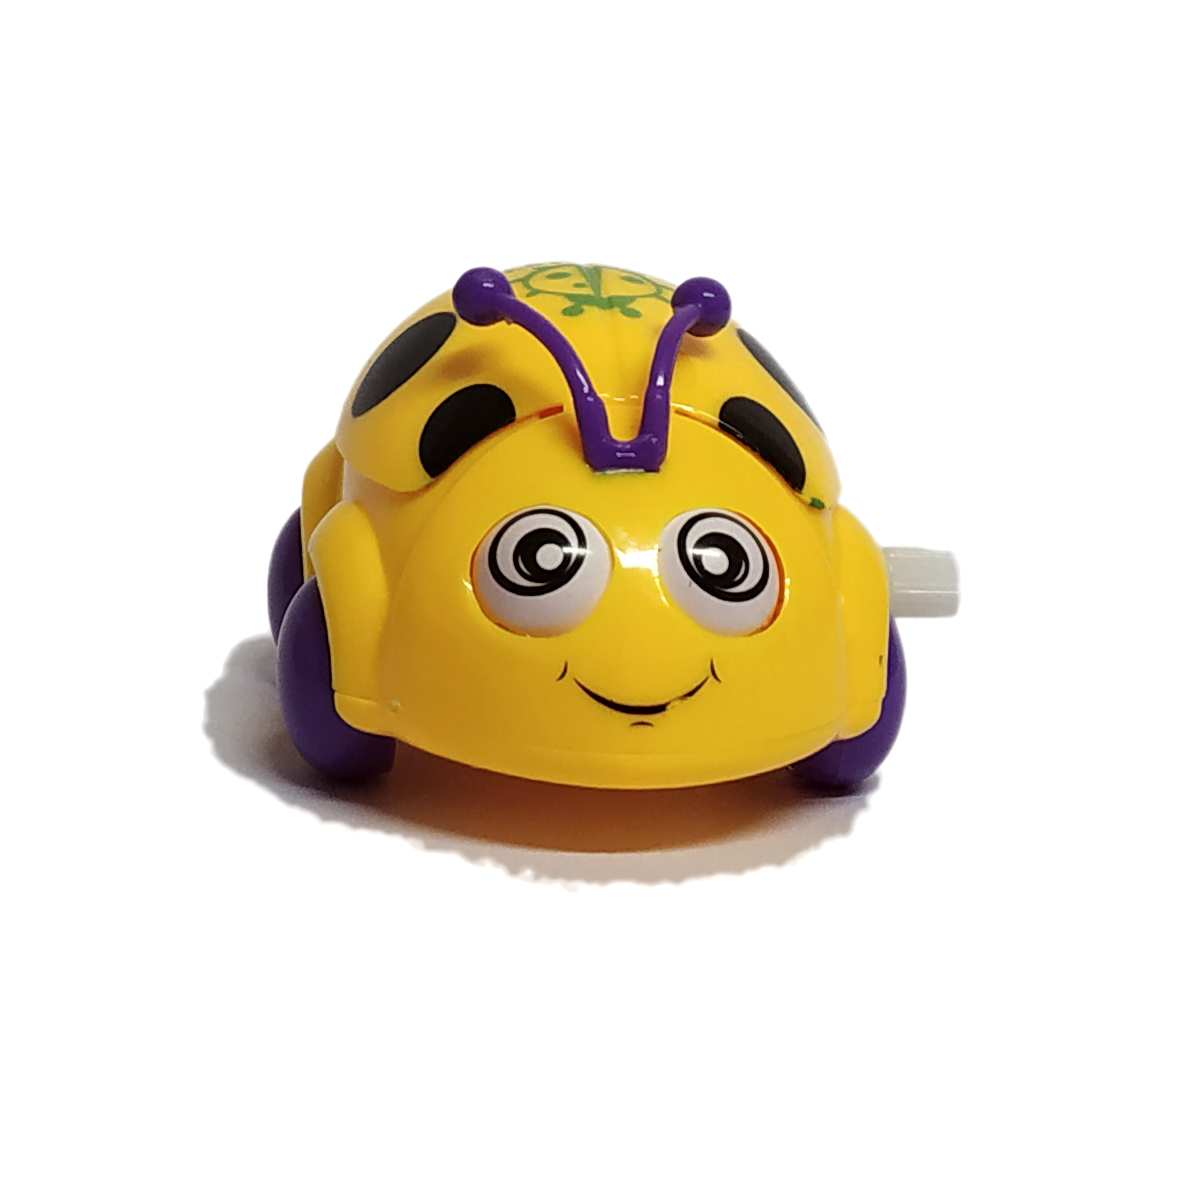 Car Beetle Funny Toys - Yellow